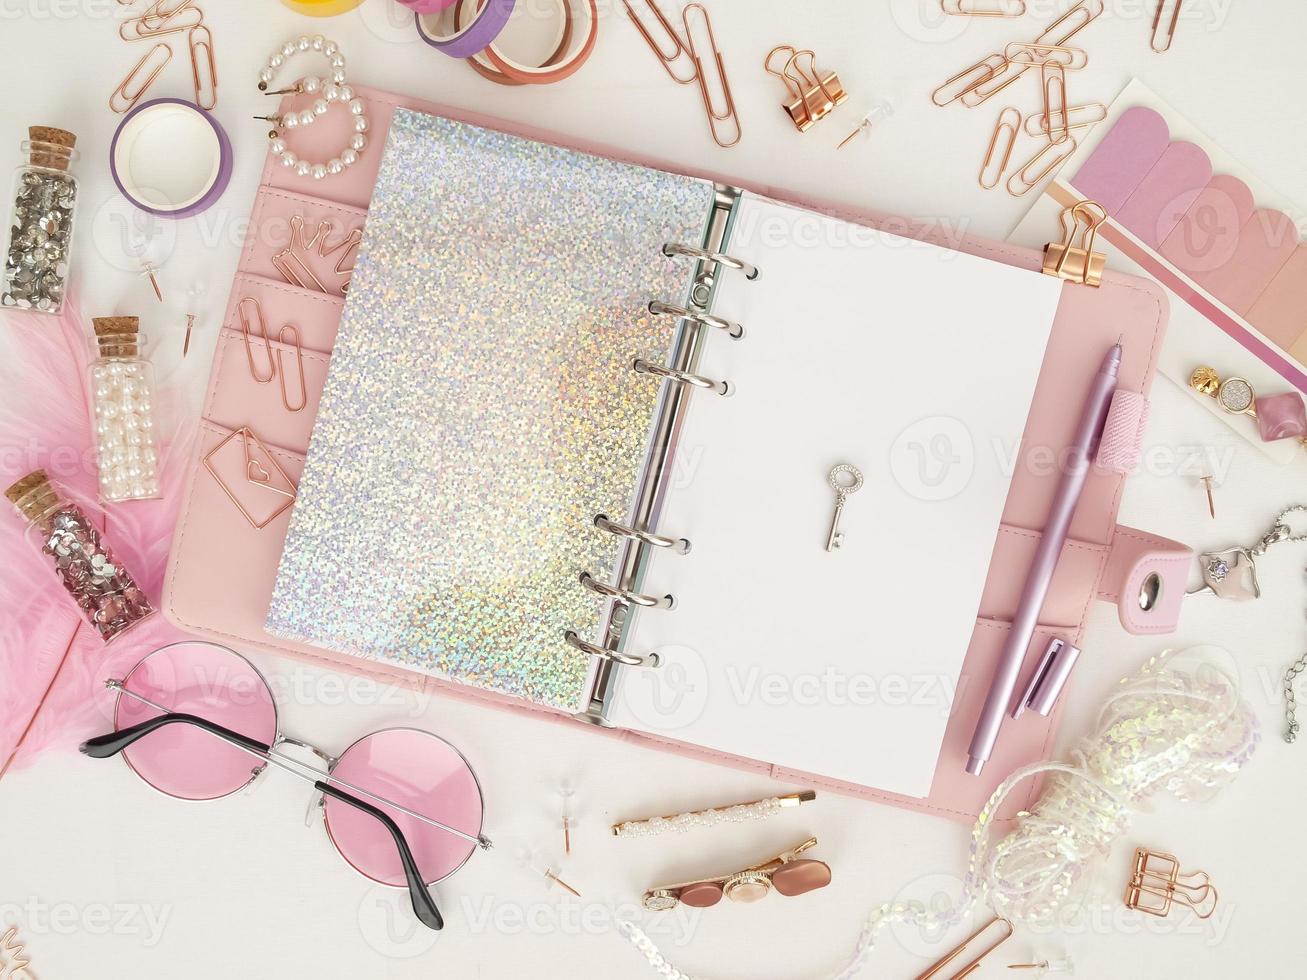 Silver key on the white page of the planner. Diary open with white and holographic page. Top view of the pink planner with stationery. Pink glamour planner decoration photo